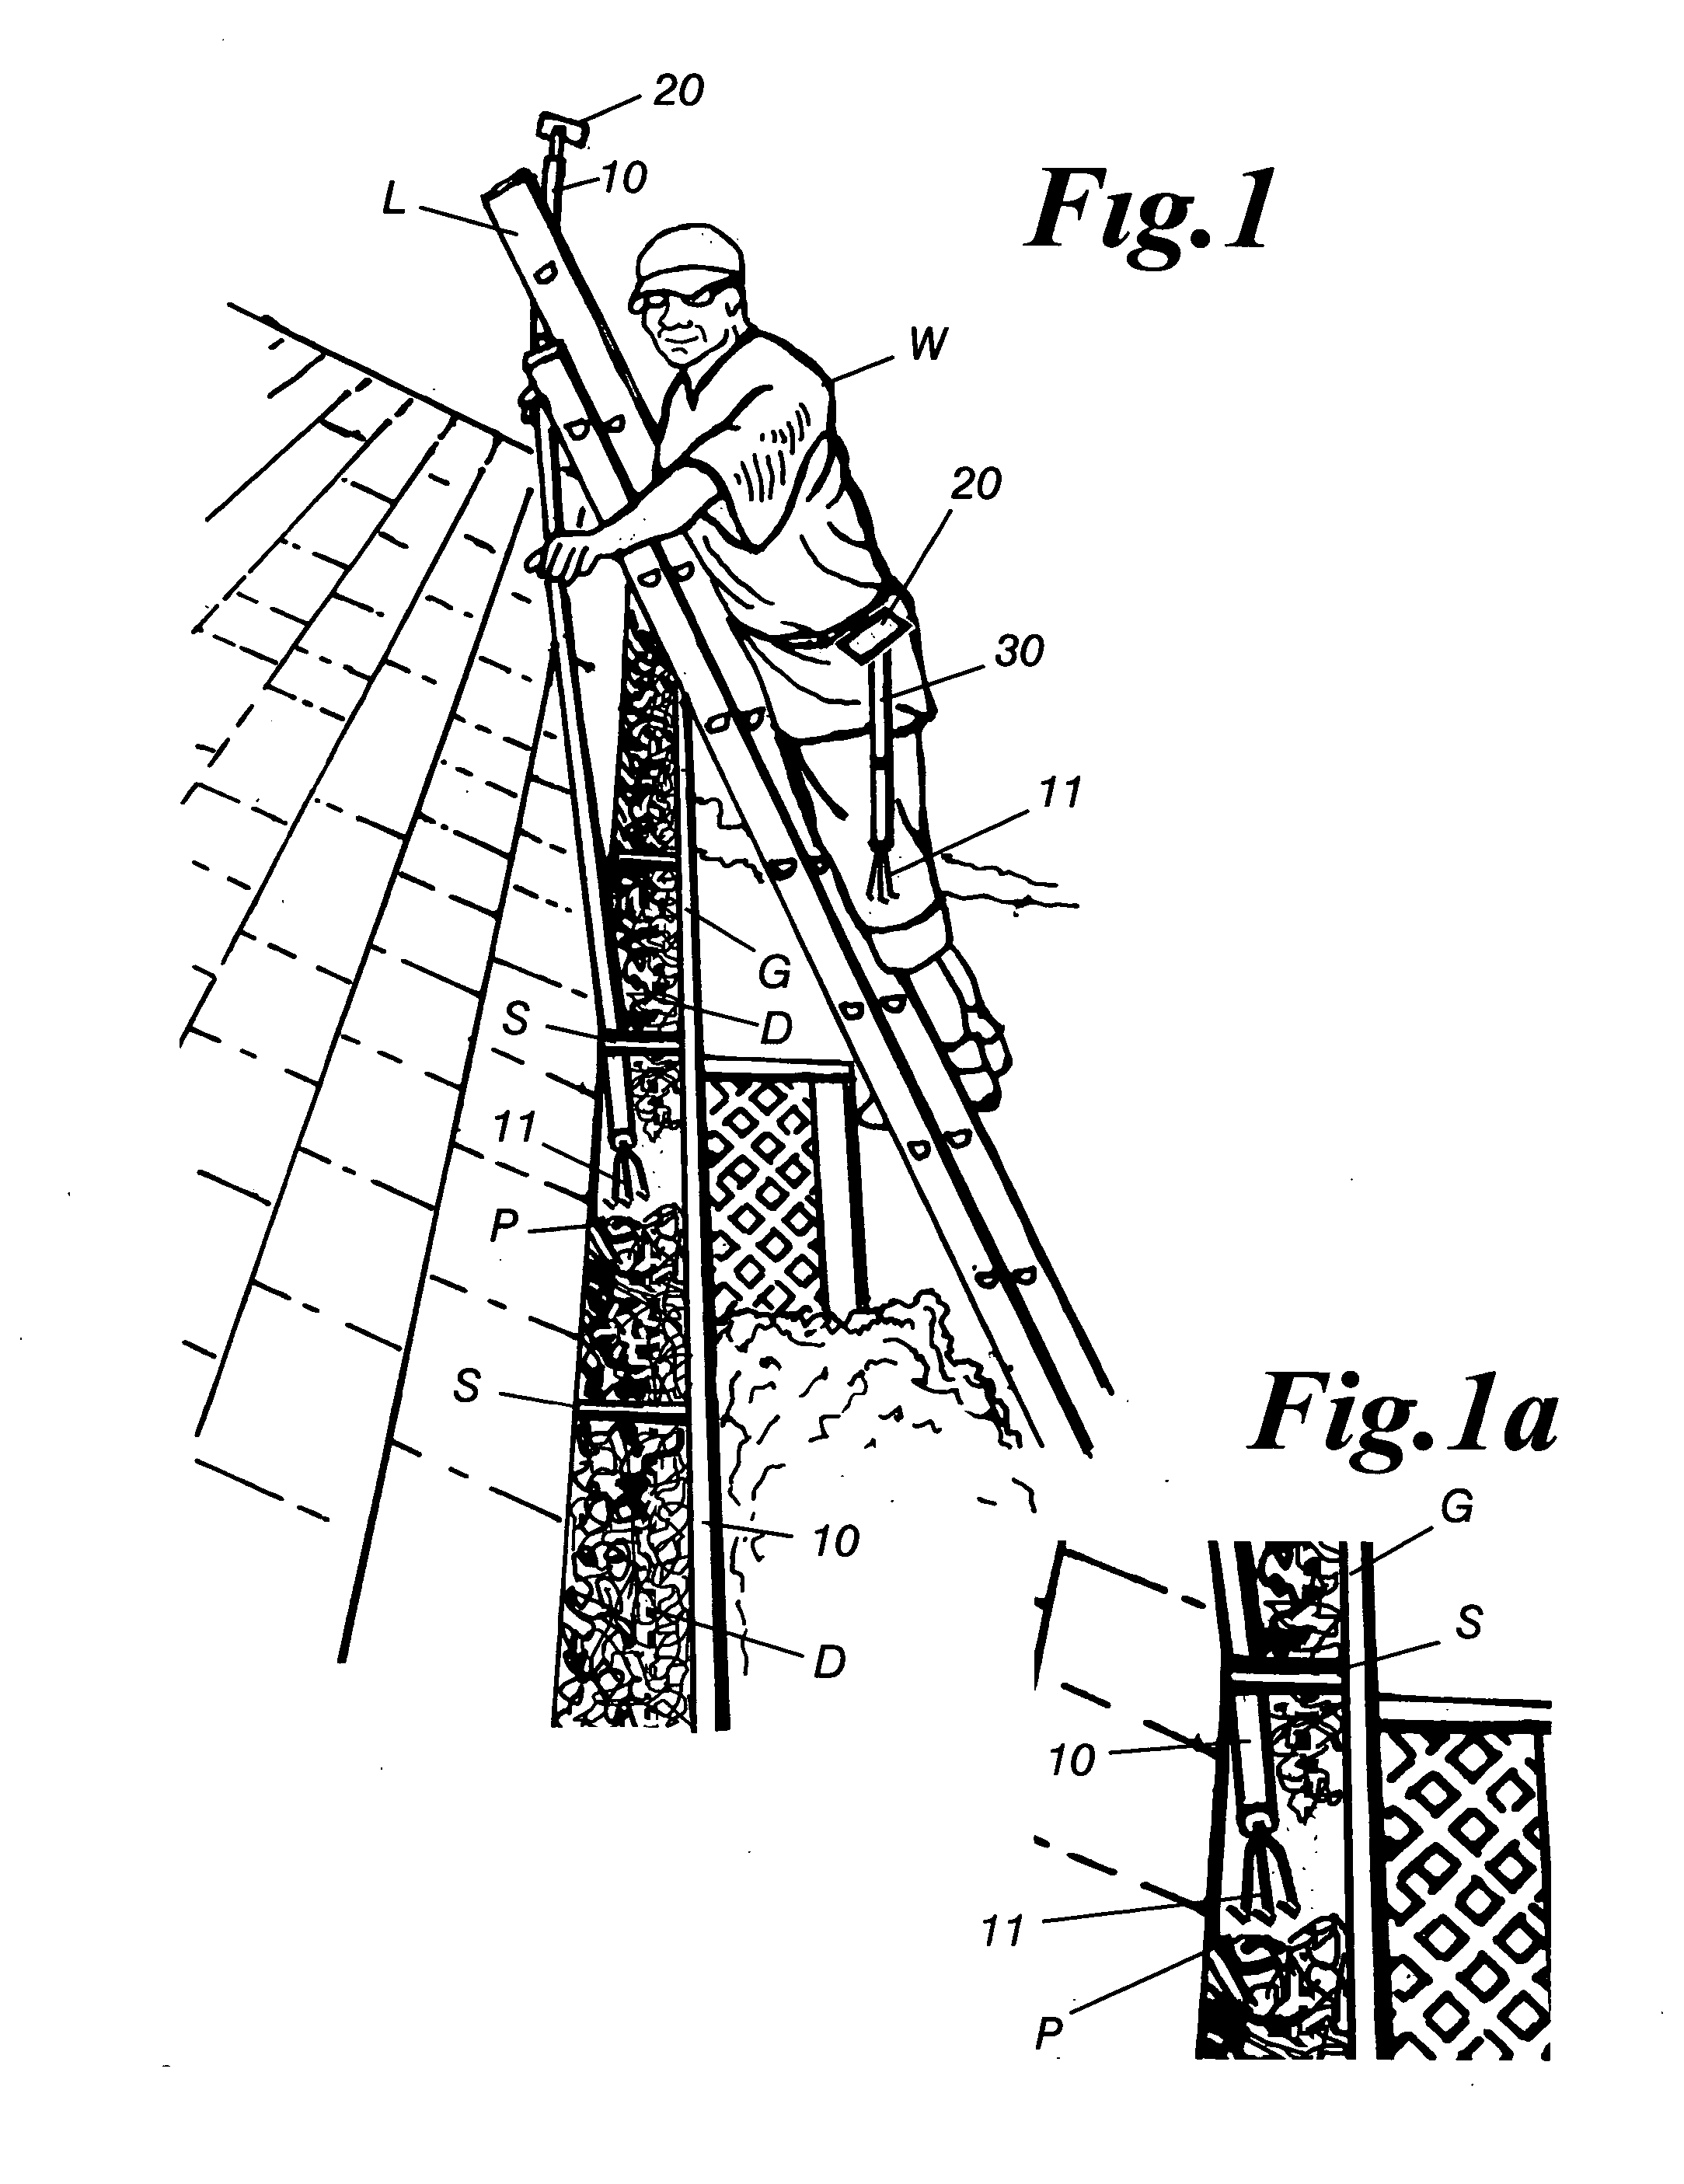 Apparatus and method for cleaning gutters